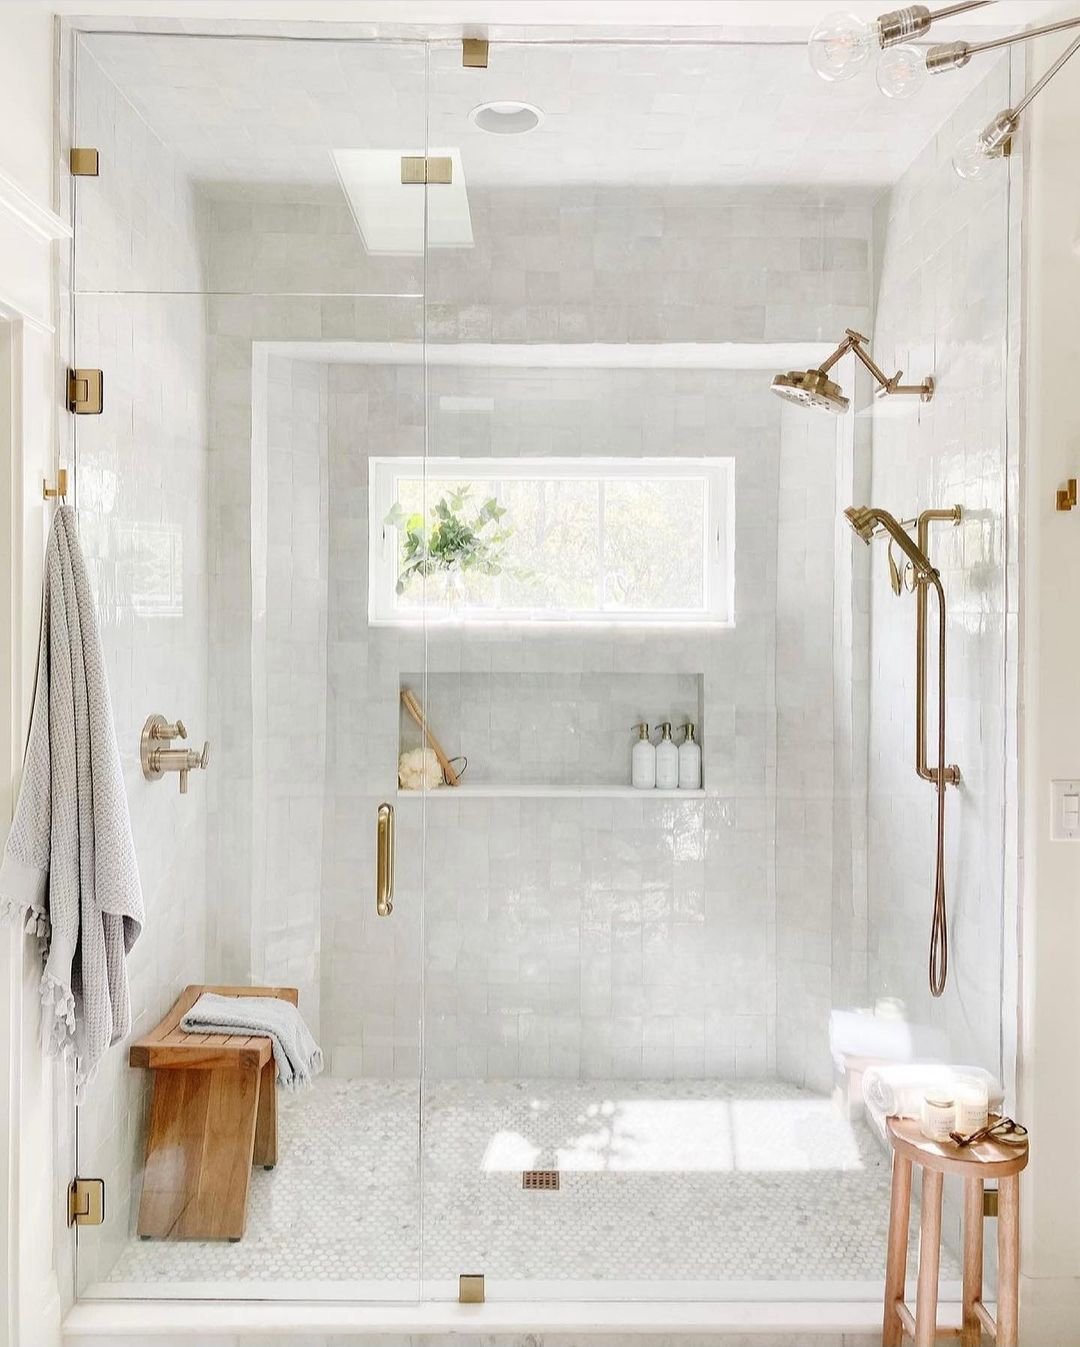 What You Should Consider Before Deciding on Glass Shower